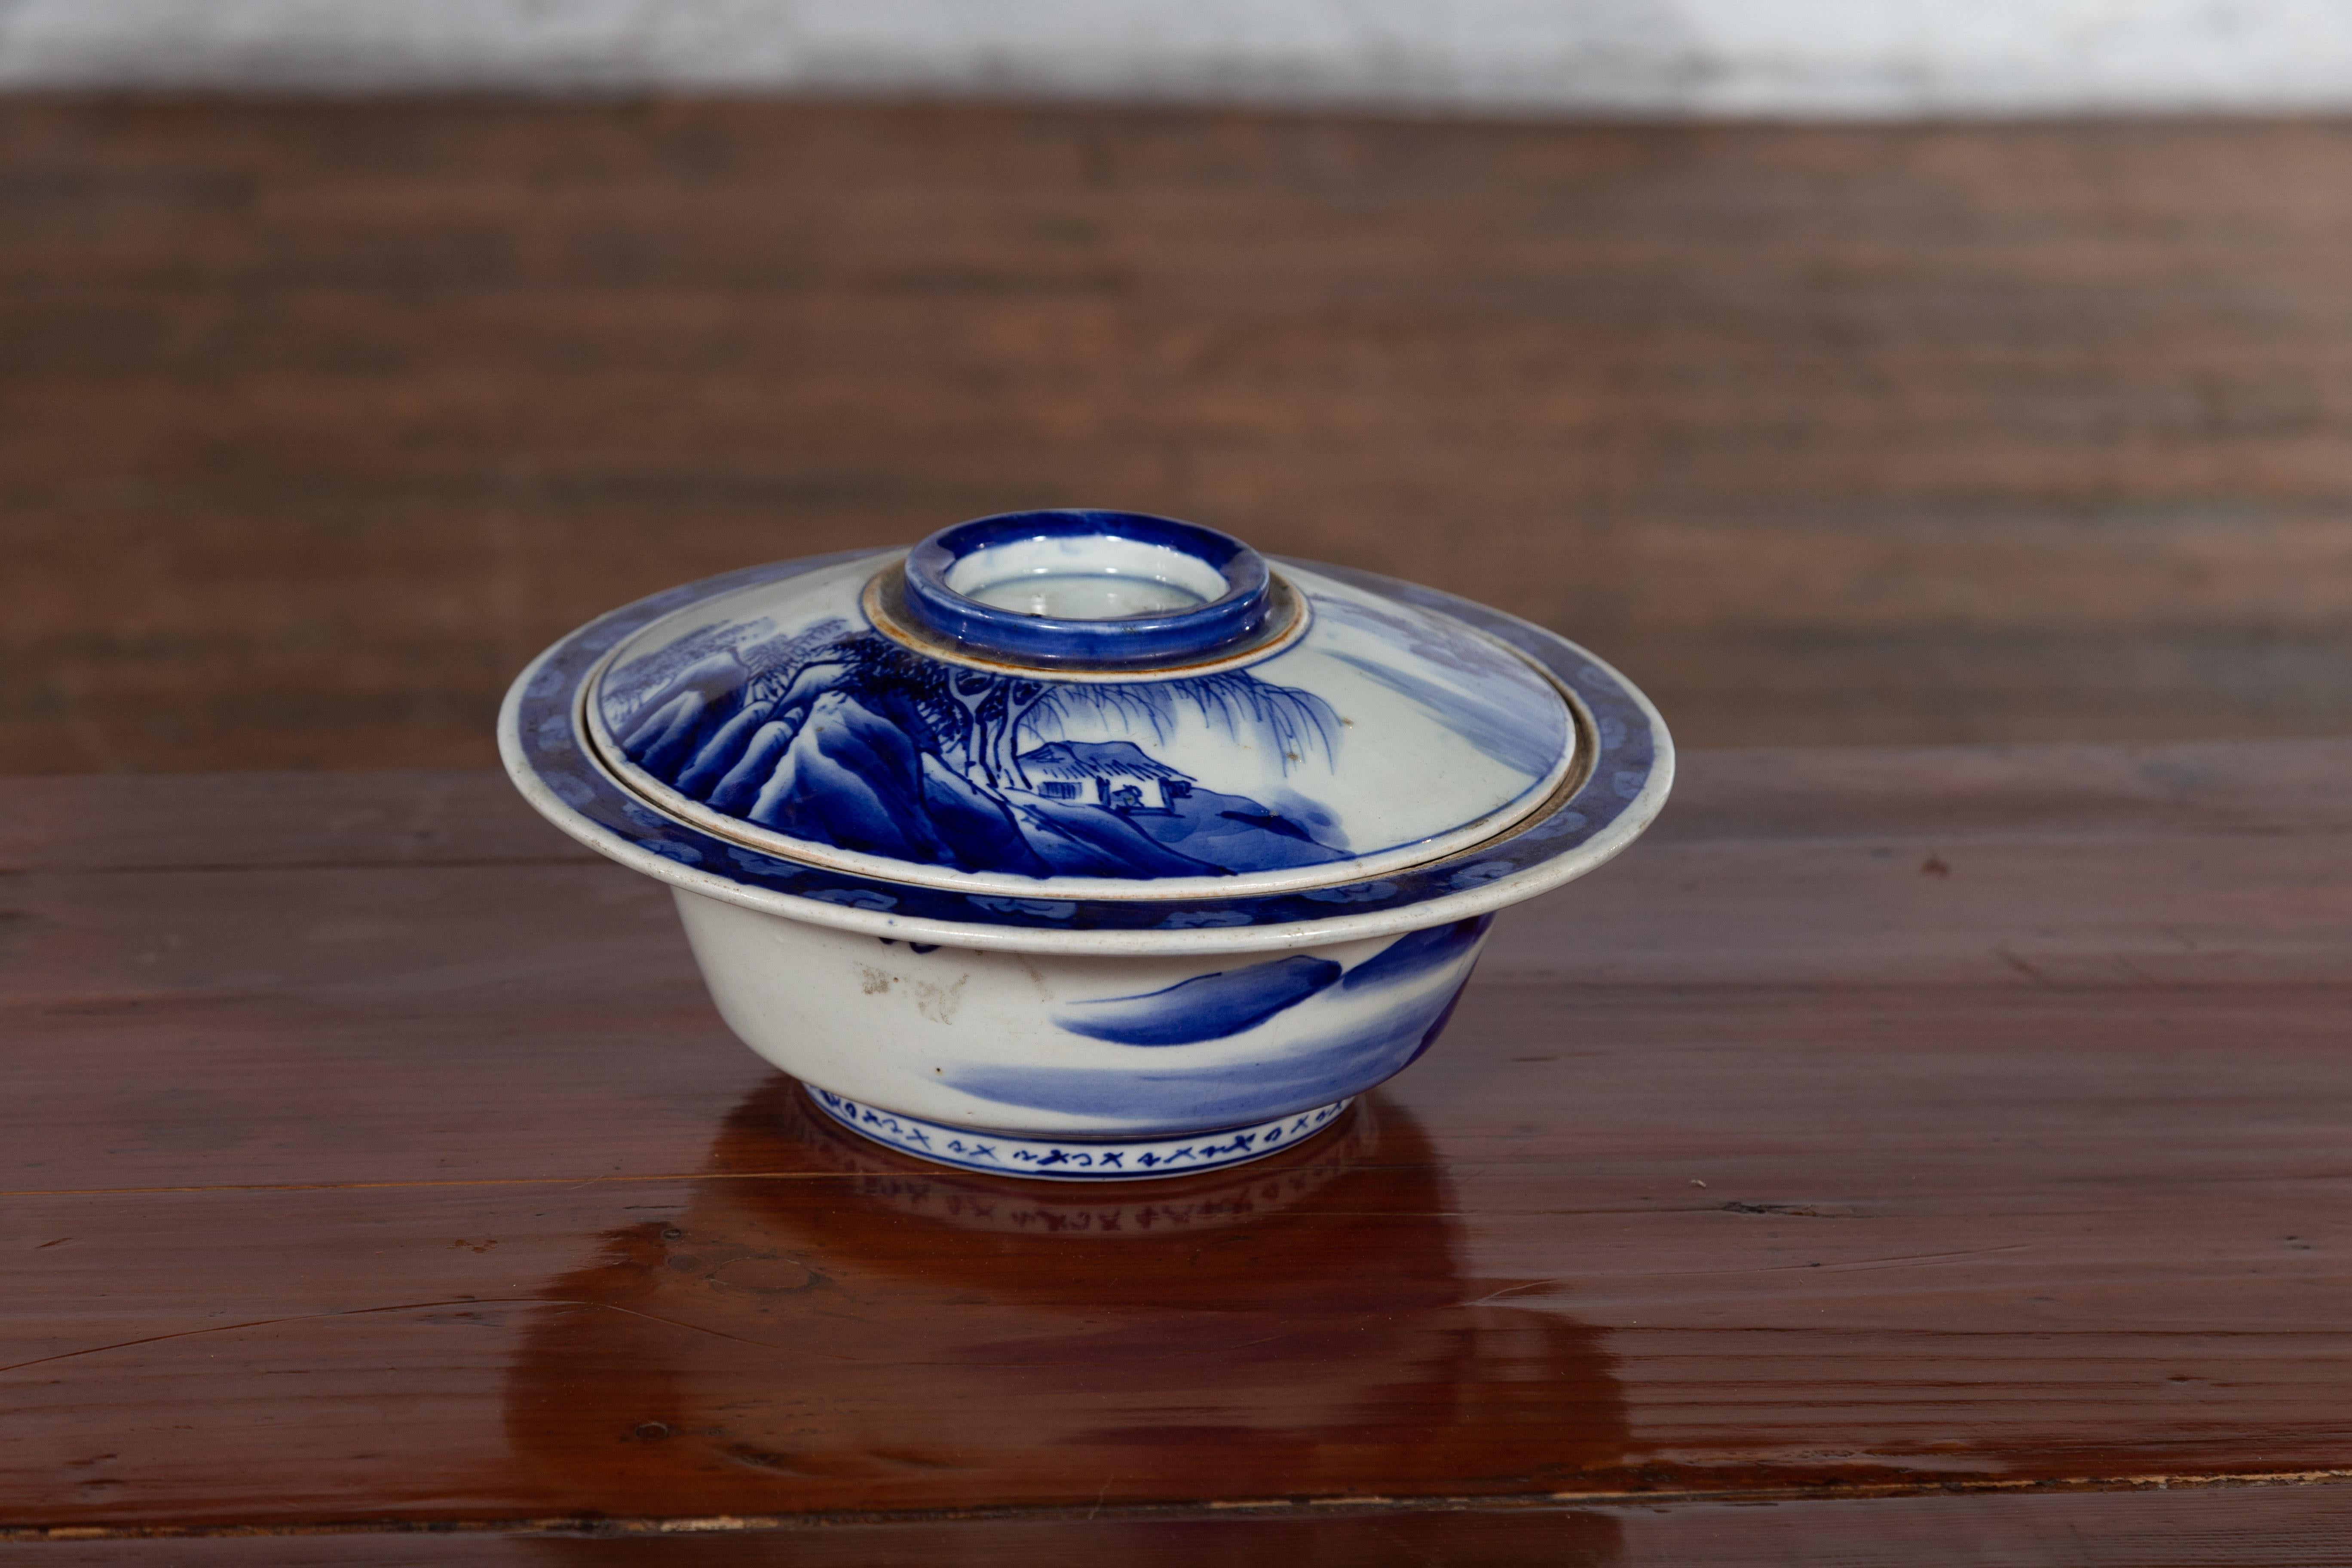 Japanese Seto Porcelain Vegetable Bowl with Hand-Painted Blue and White Décor In Good Condition For Sale In Yonkers, NY